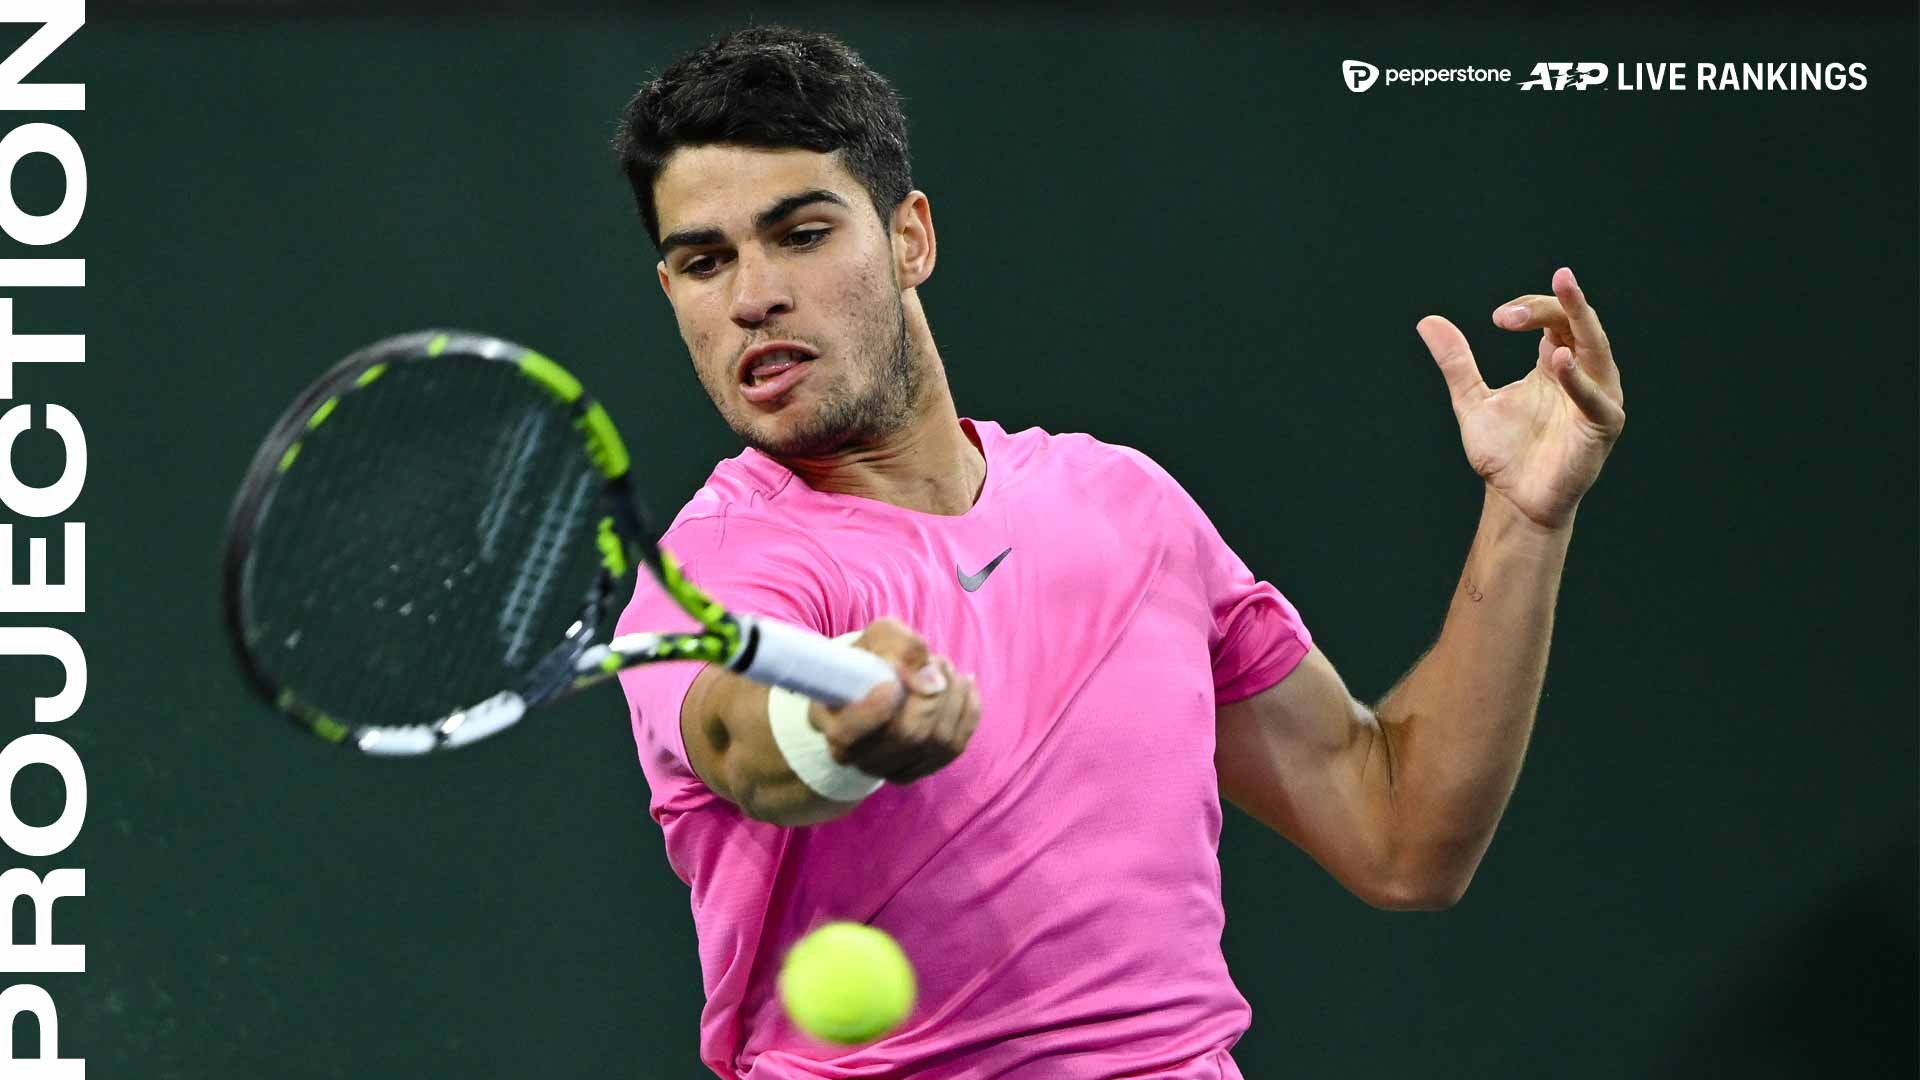 Carlos Alcaraz returns to World No. 1 on Monday after winning the Indian Wells title.